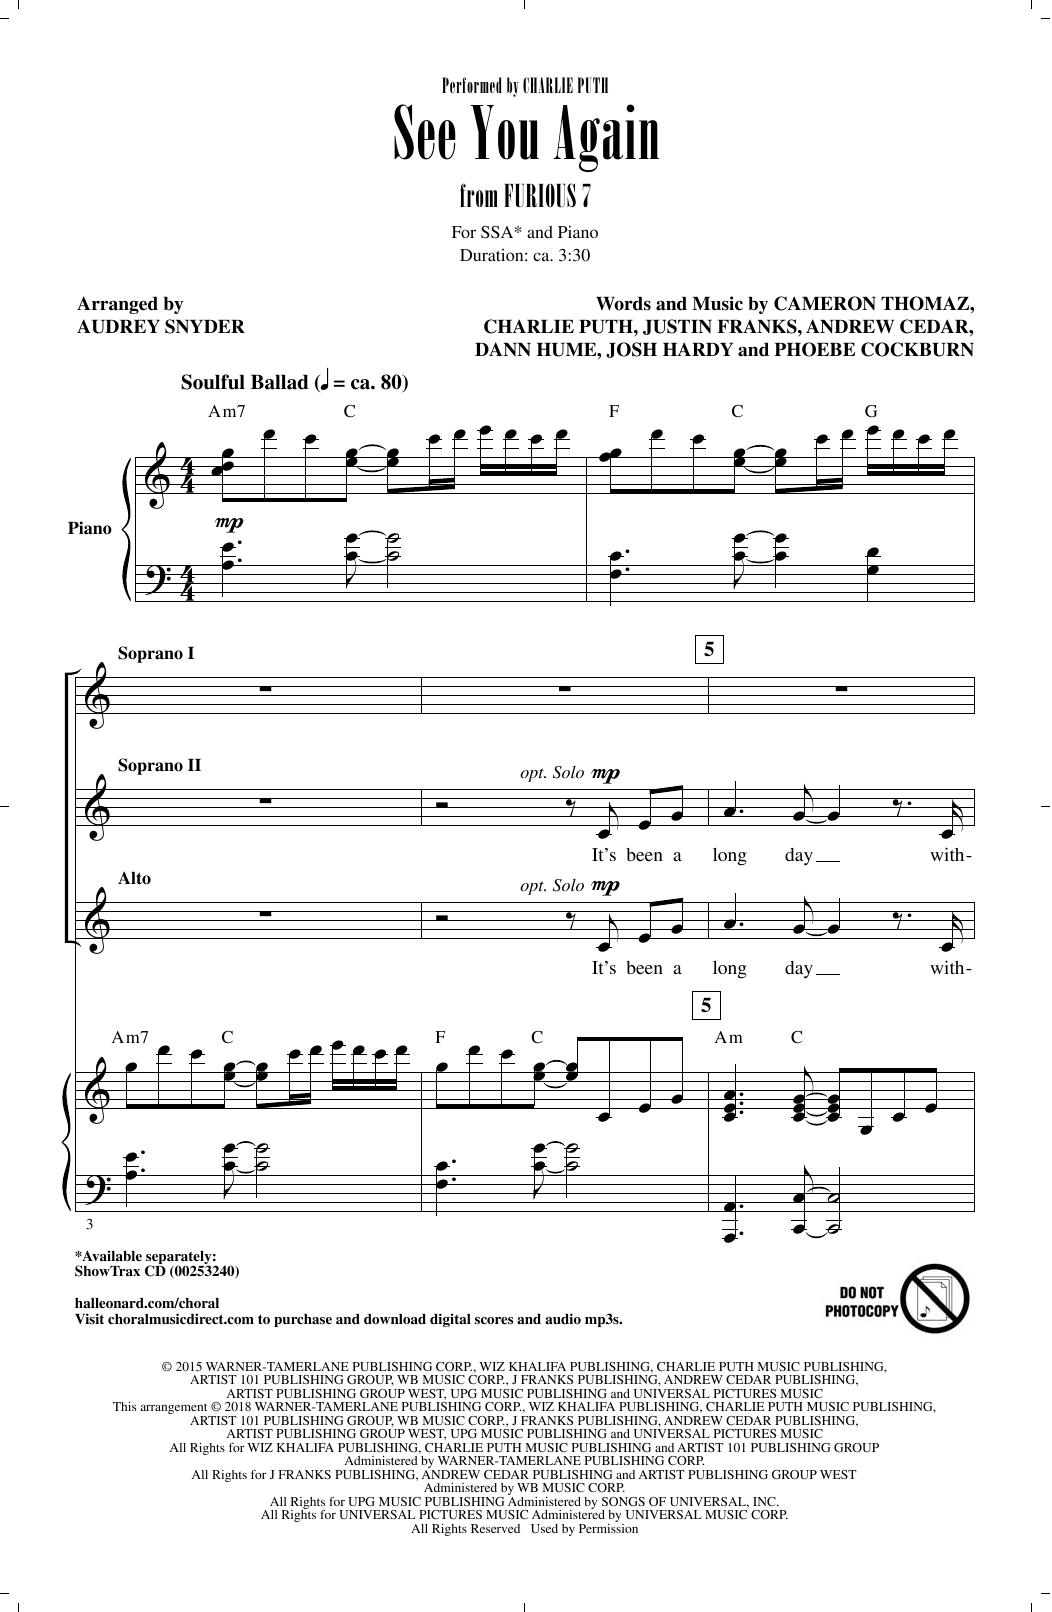 Download Audrey Snyder See You Again Sheet Music